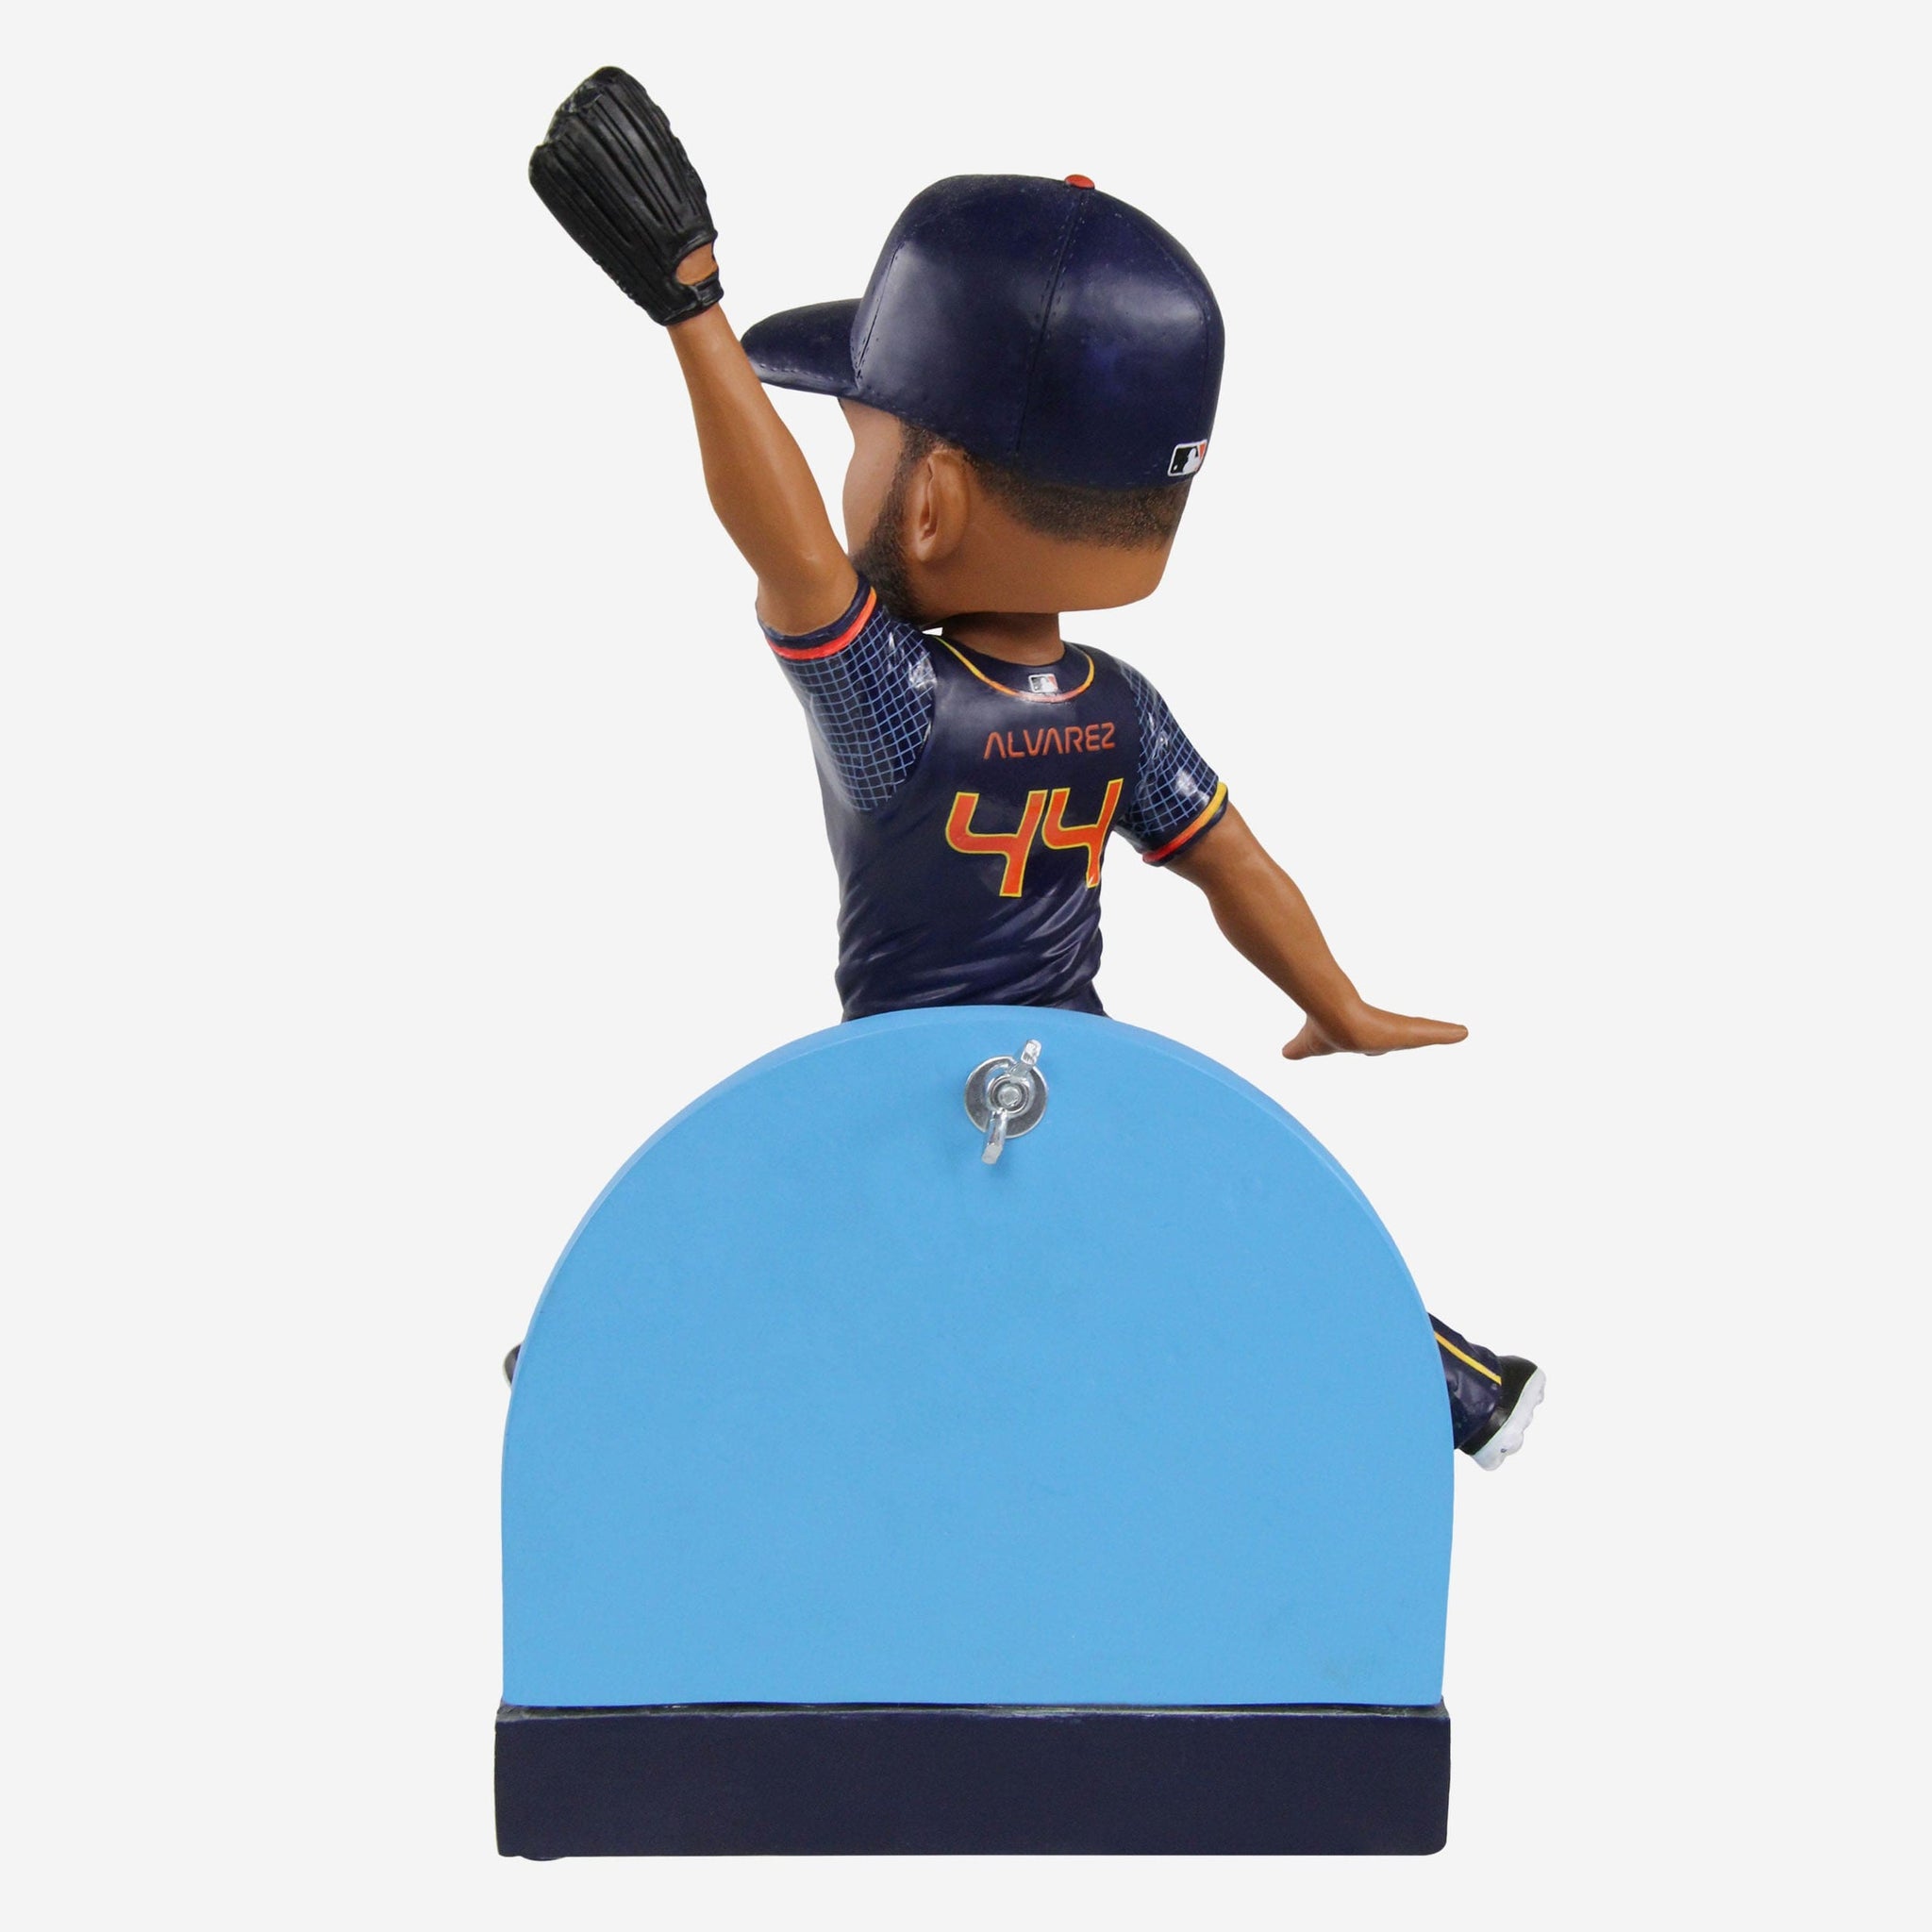 How Yordan Alvarez's Wife and a Bobblehead Giveaway Inspired the